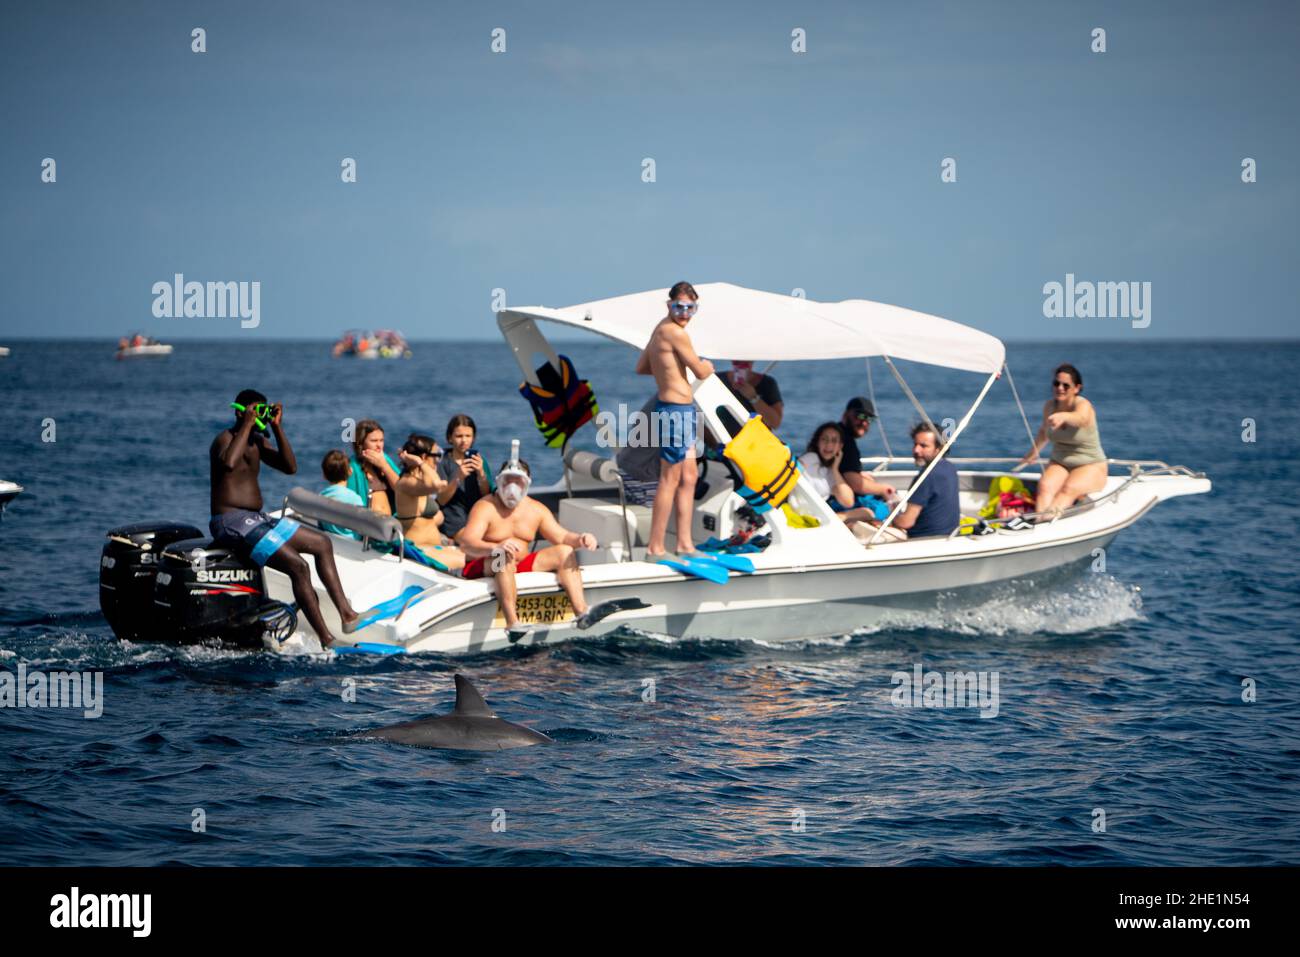 Boats of tourists amongst a pod of dolphins off the coast of Mauritius Stock Photo